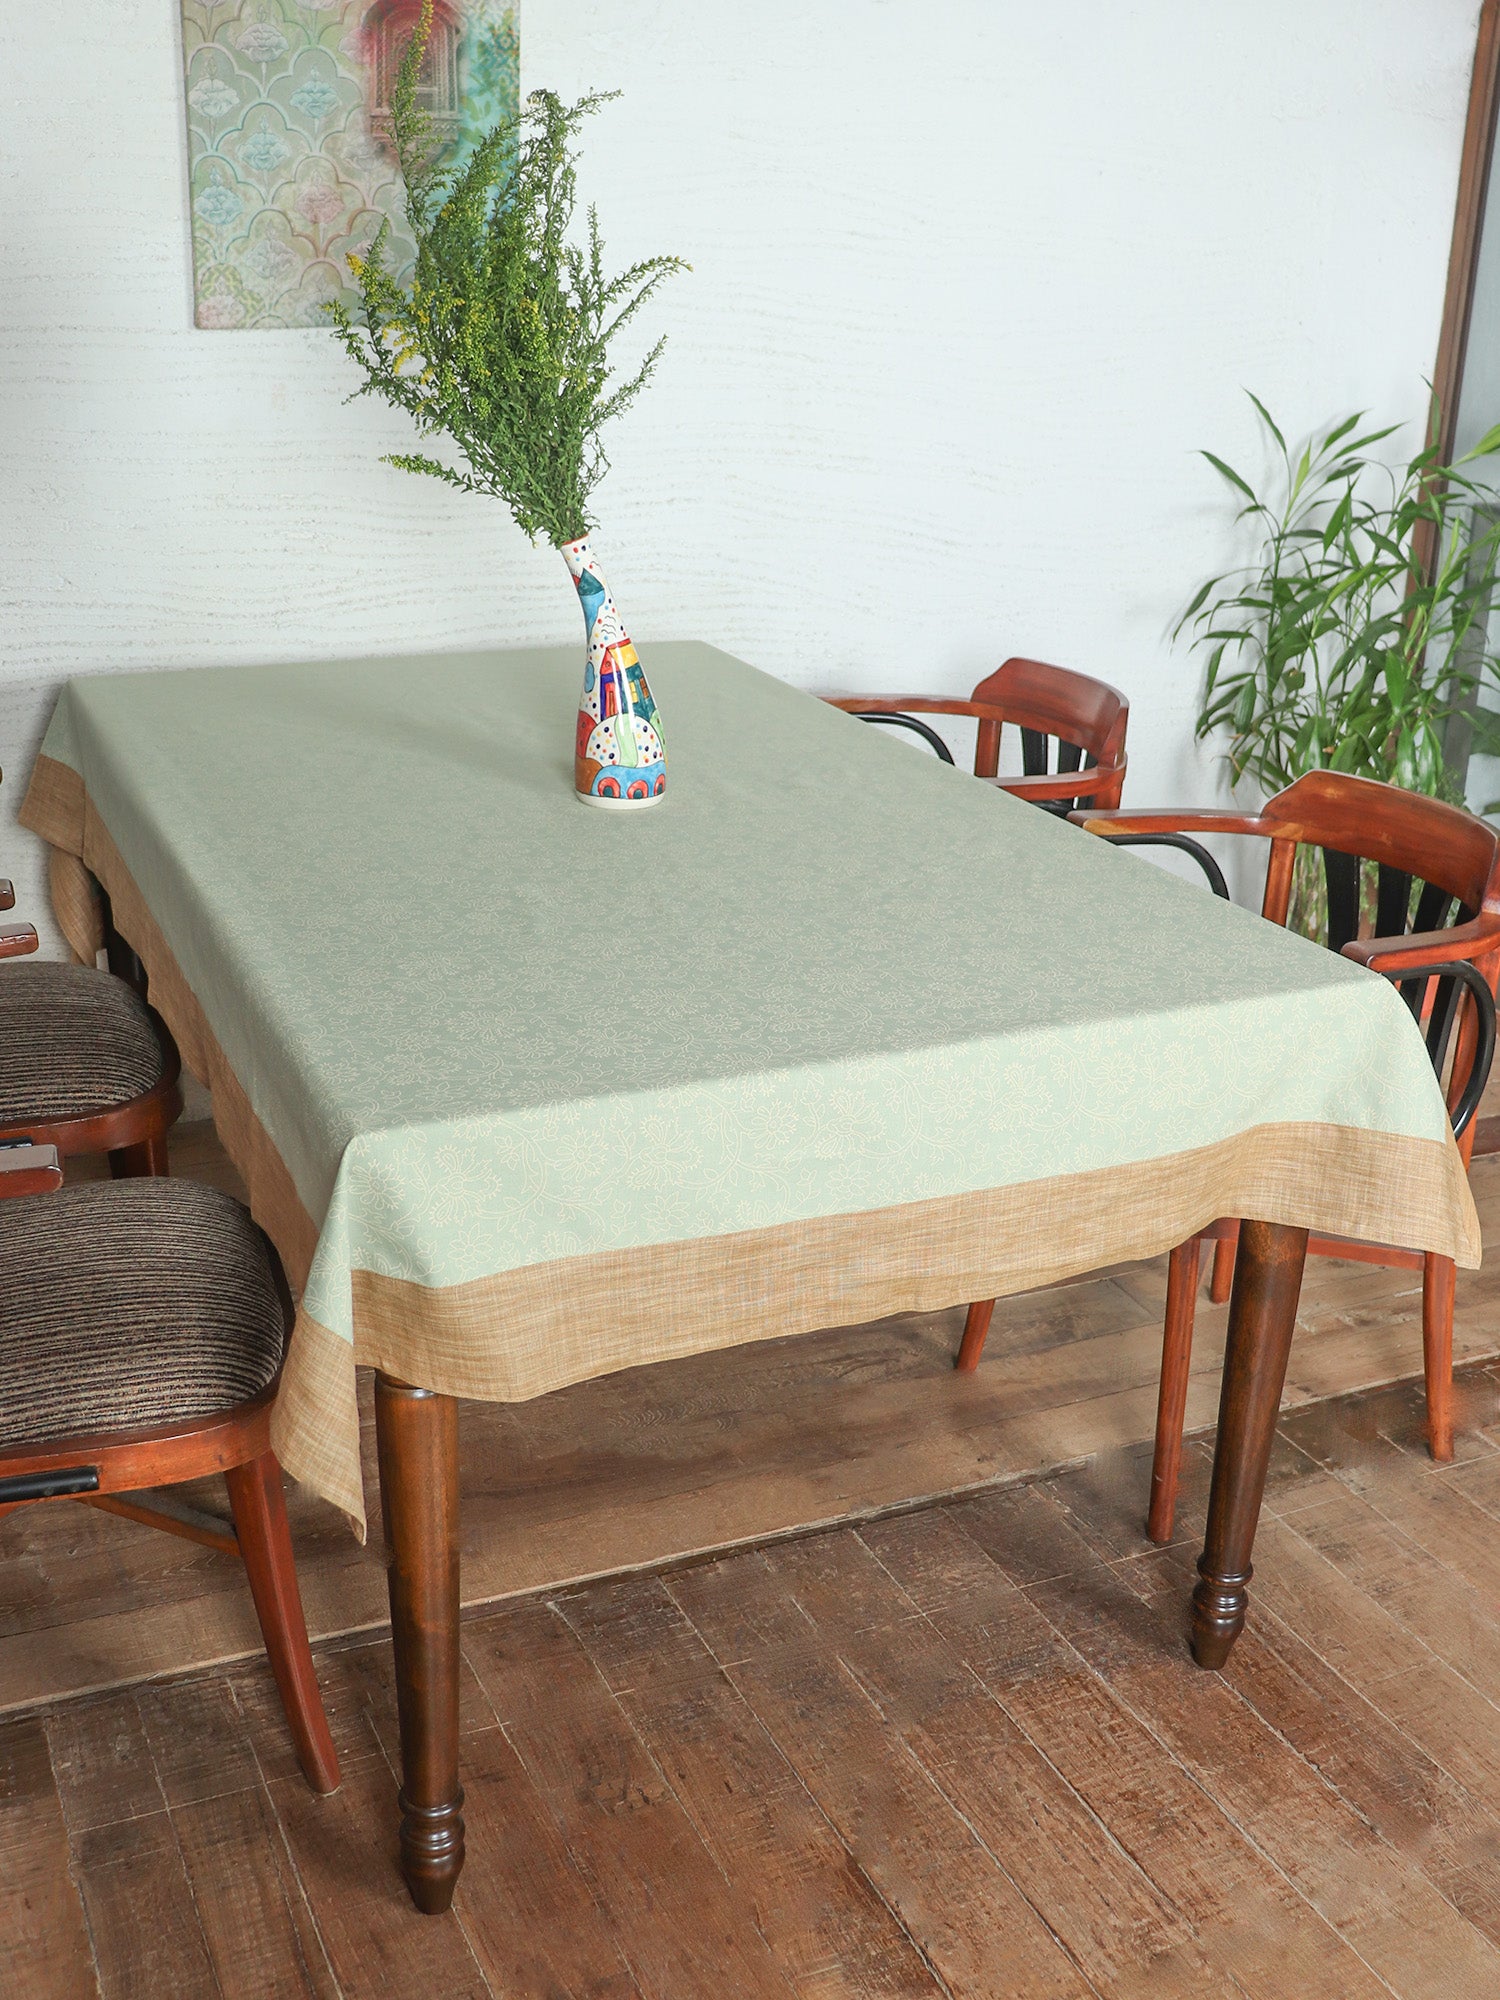 Table Cover with Panel Border and  Self Textured Floral Pattern | Cotton Blend - Green Brown | Heat Resistant Cover for Kitchen Table/Dining Table Cloth, 52 X 84 Inches; 130 cm X 210 cm 